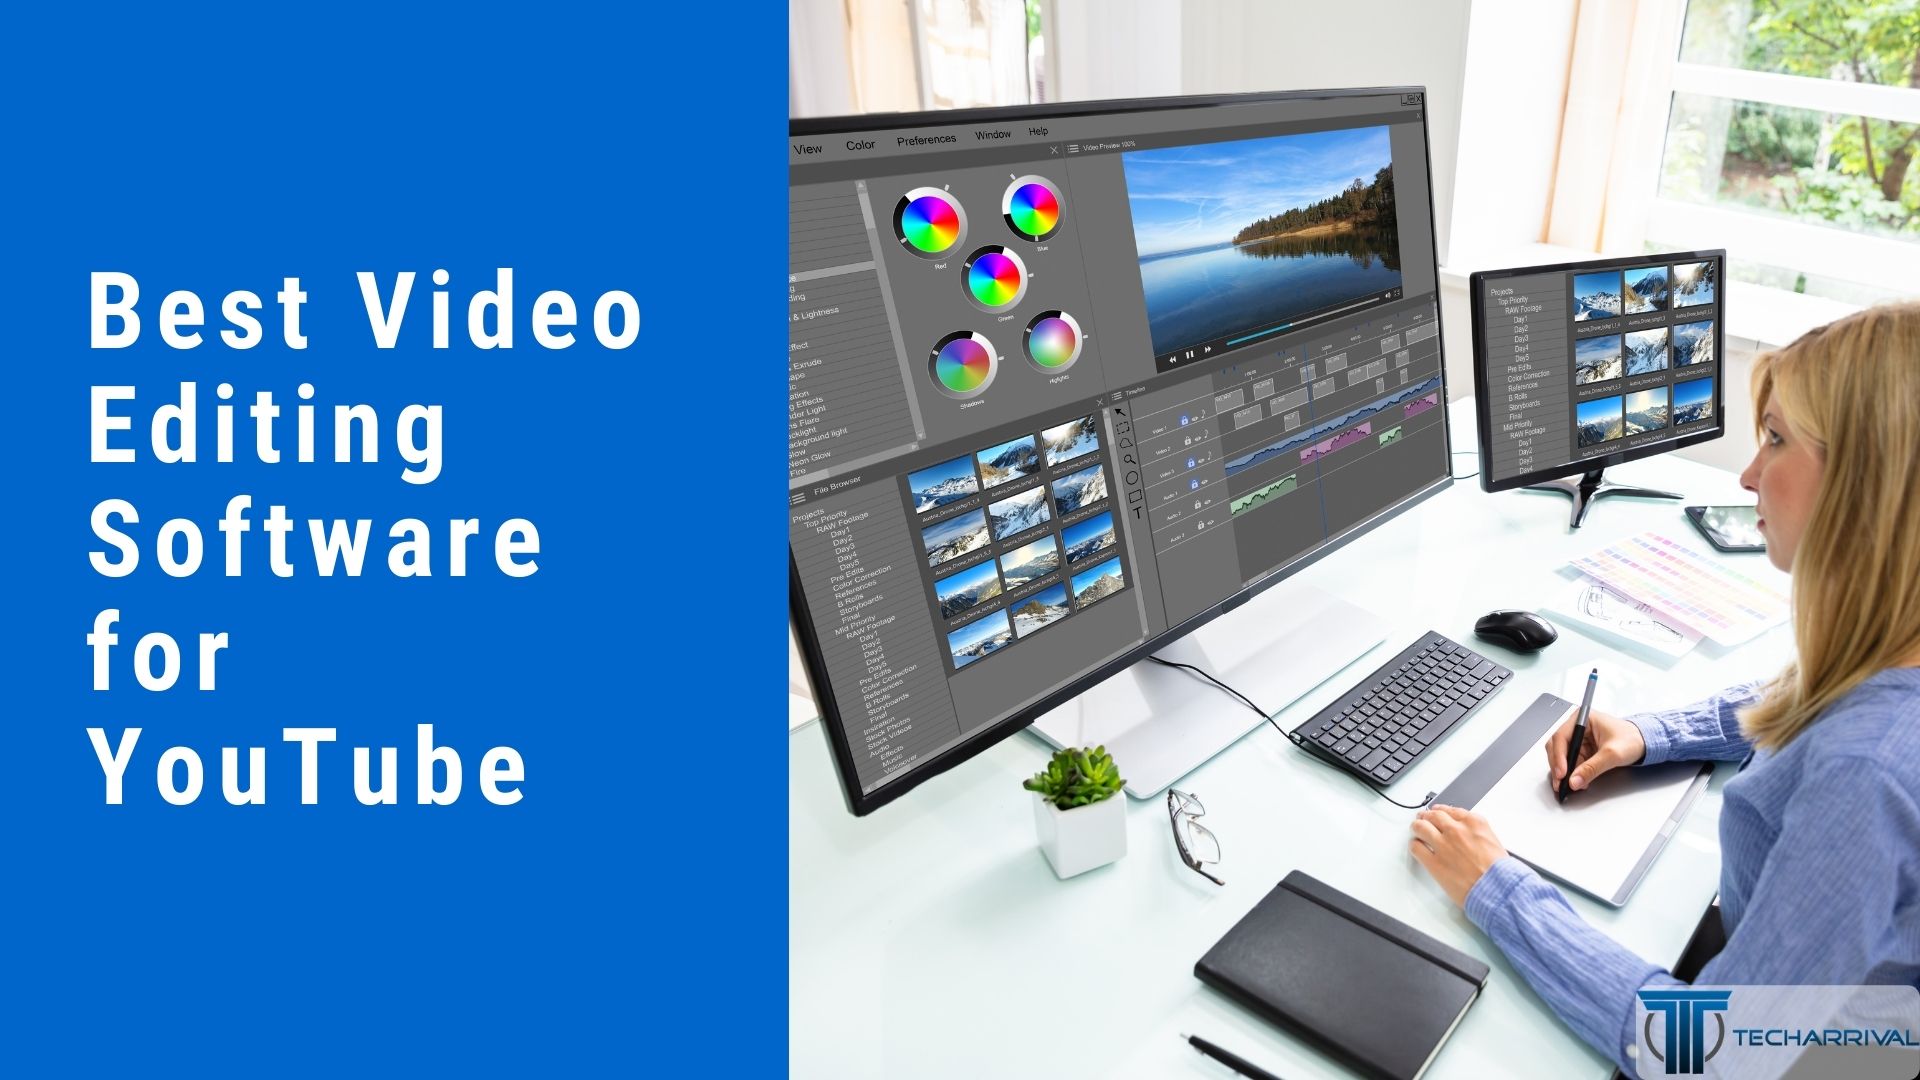 youtube video editing software for beginners